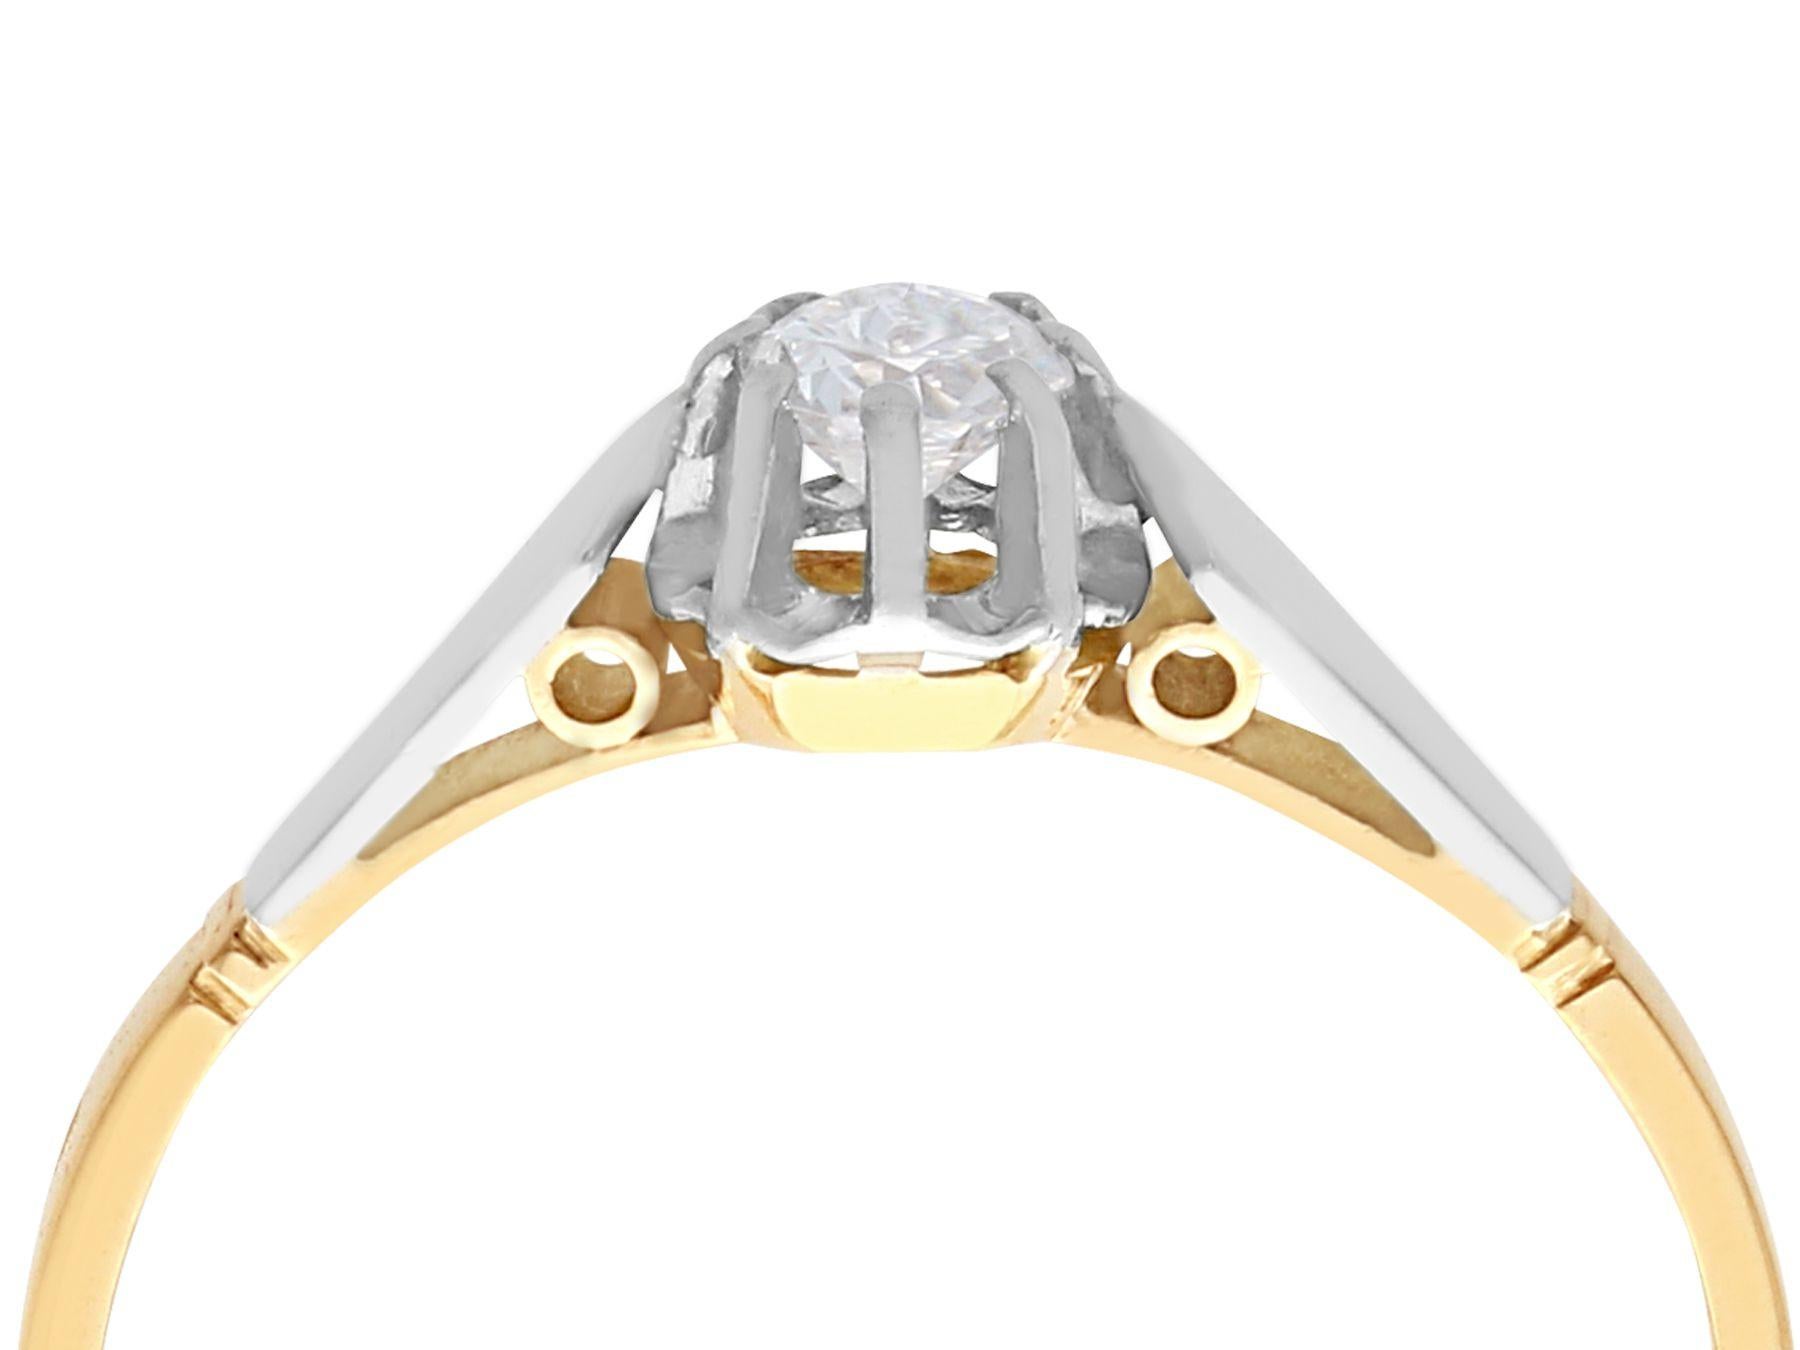 An impressive vintage 1940s 0.22 carat diamond and 18 karat yellow gold, 18 karat white gold set solitaire ring; part of our diverse diamond jewelry collections.

This fine and impressive vintage solitaire engagement ring has been crafted in 18k